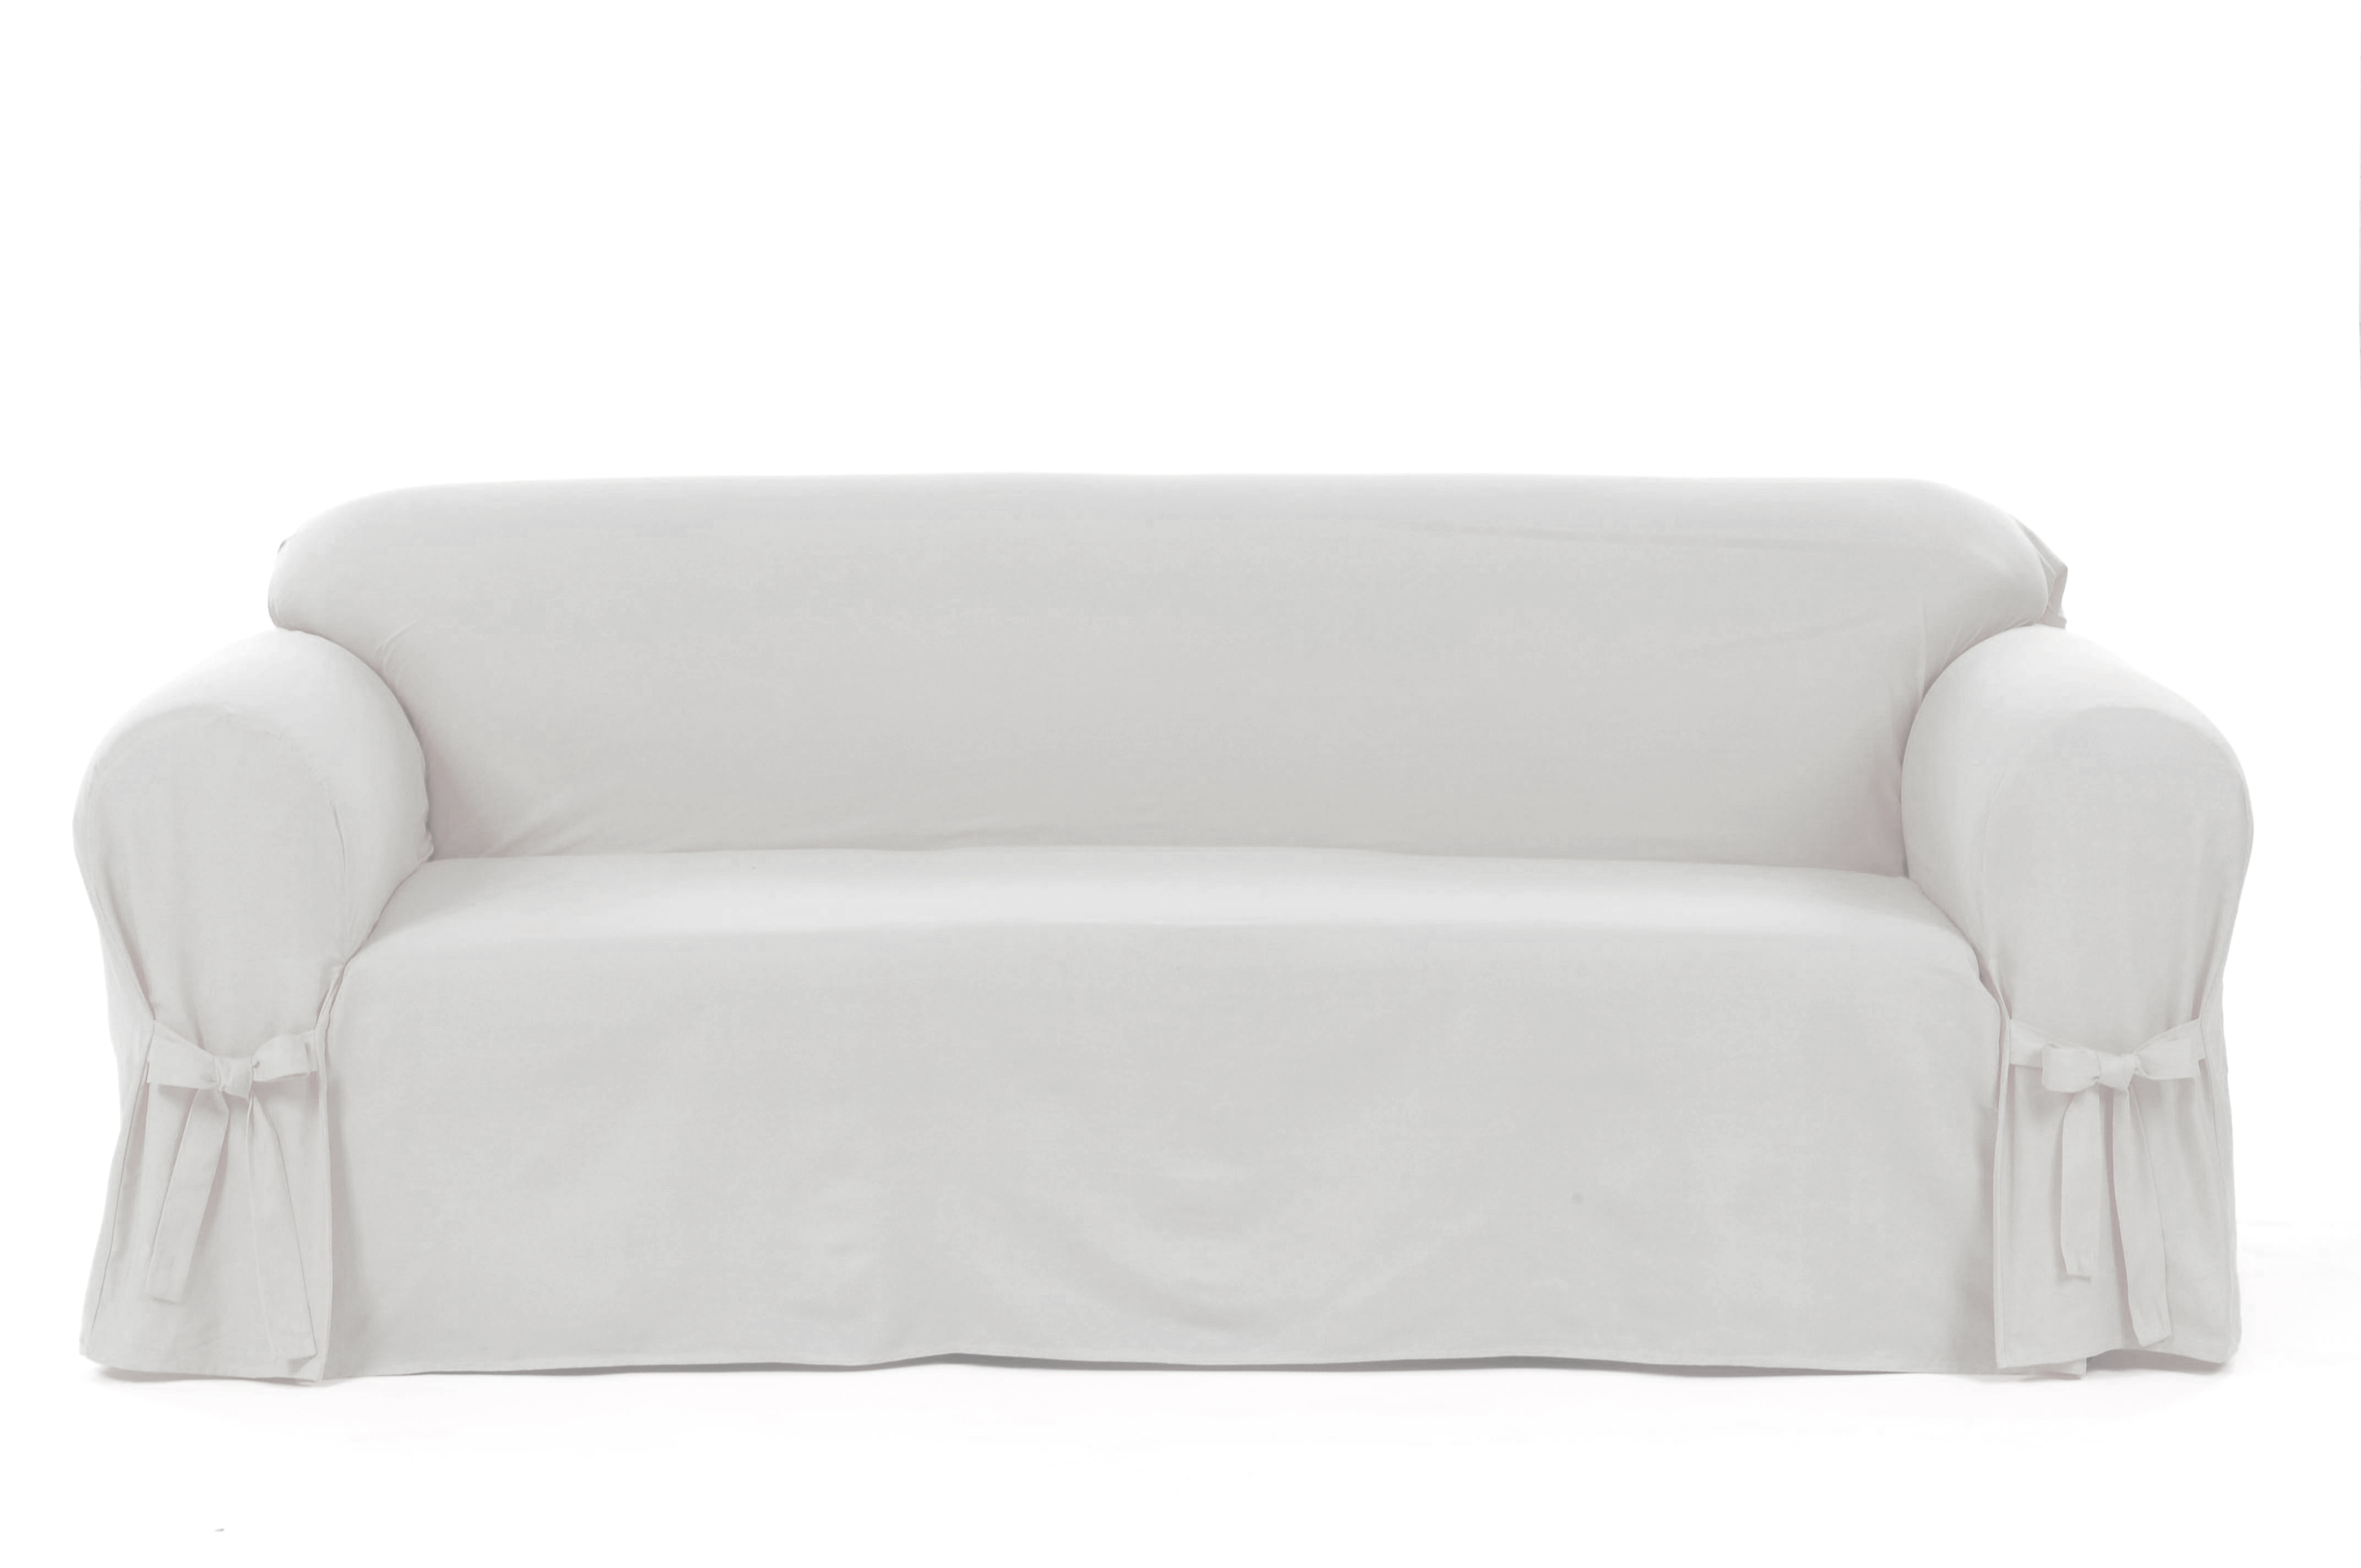 Classic Slipcovers Cotton Duck one piece loveseat slipcover